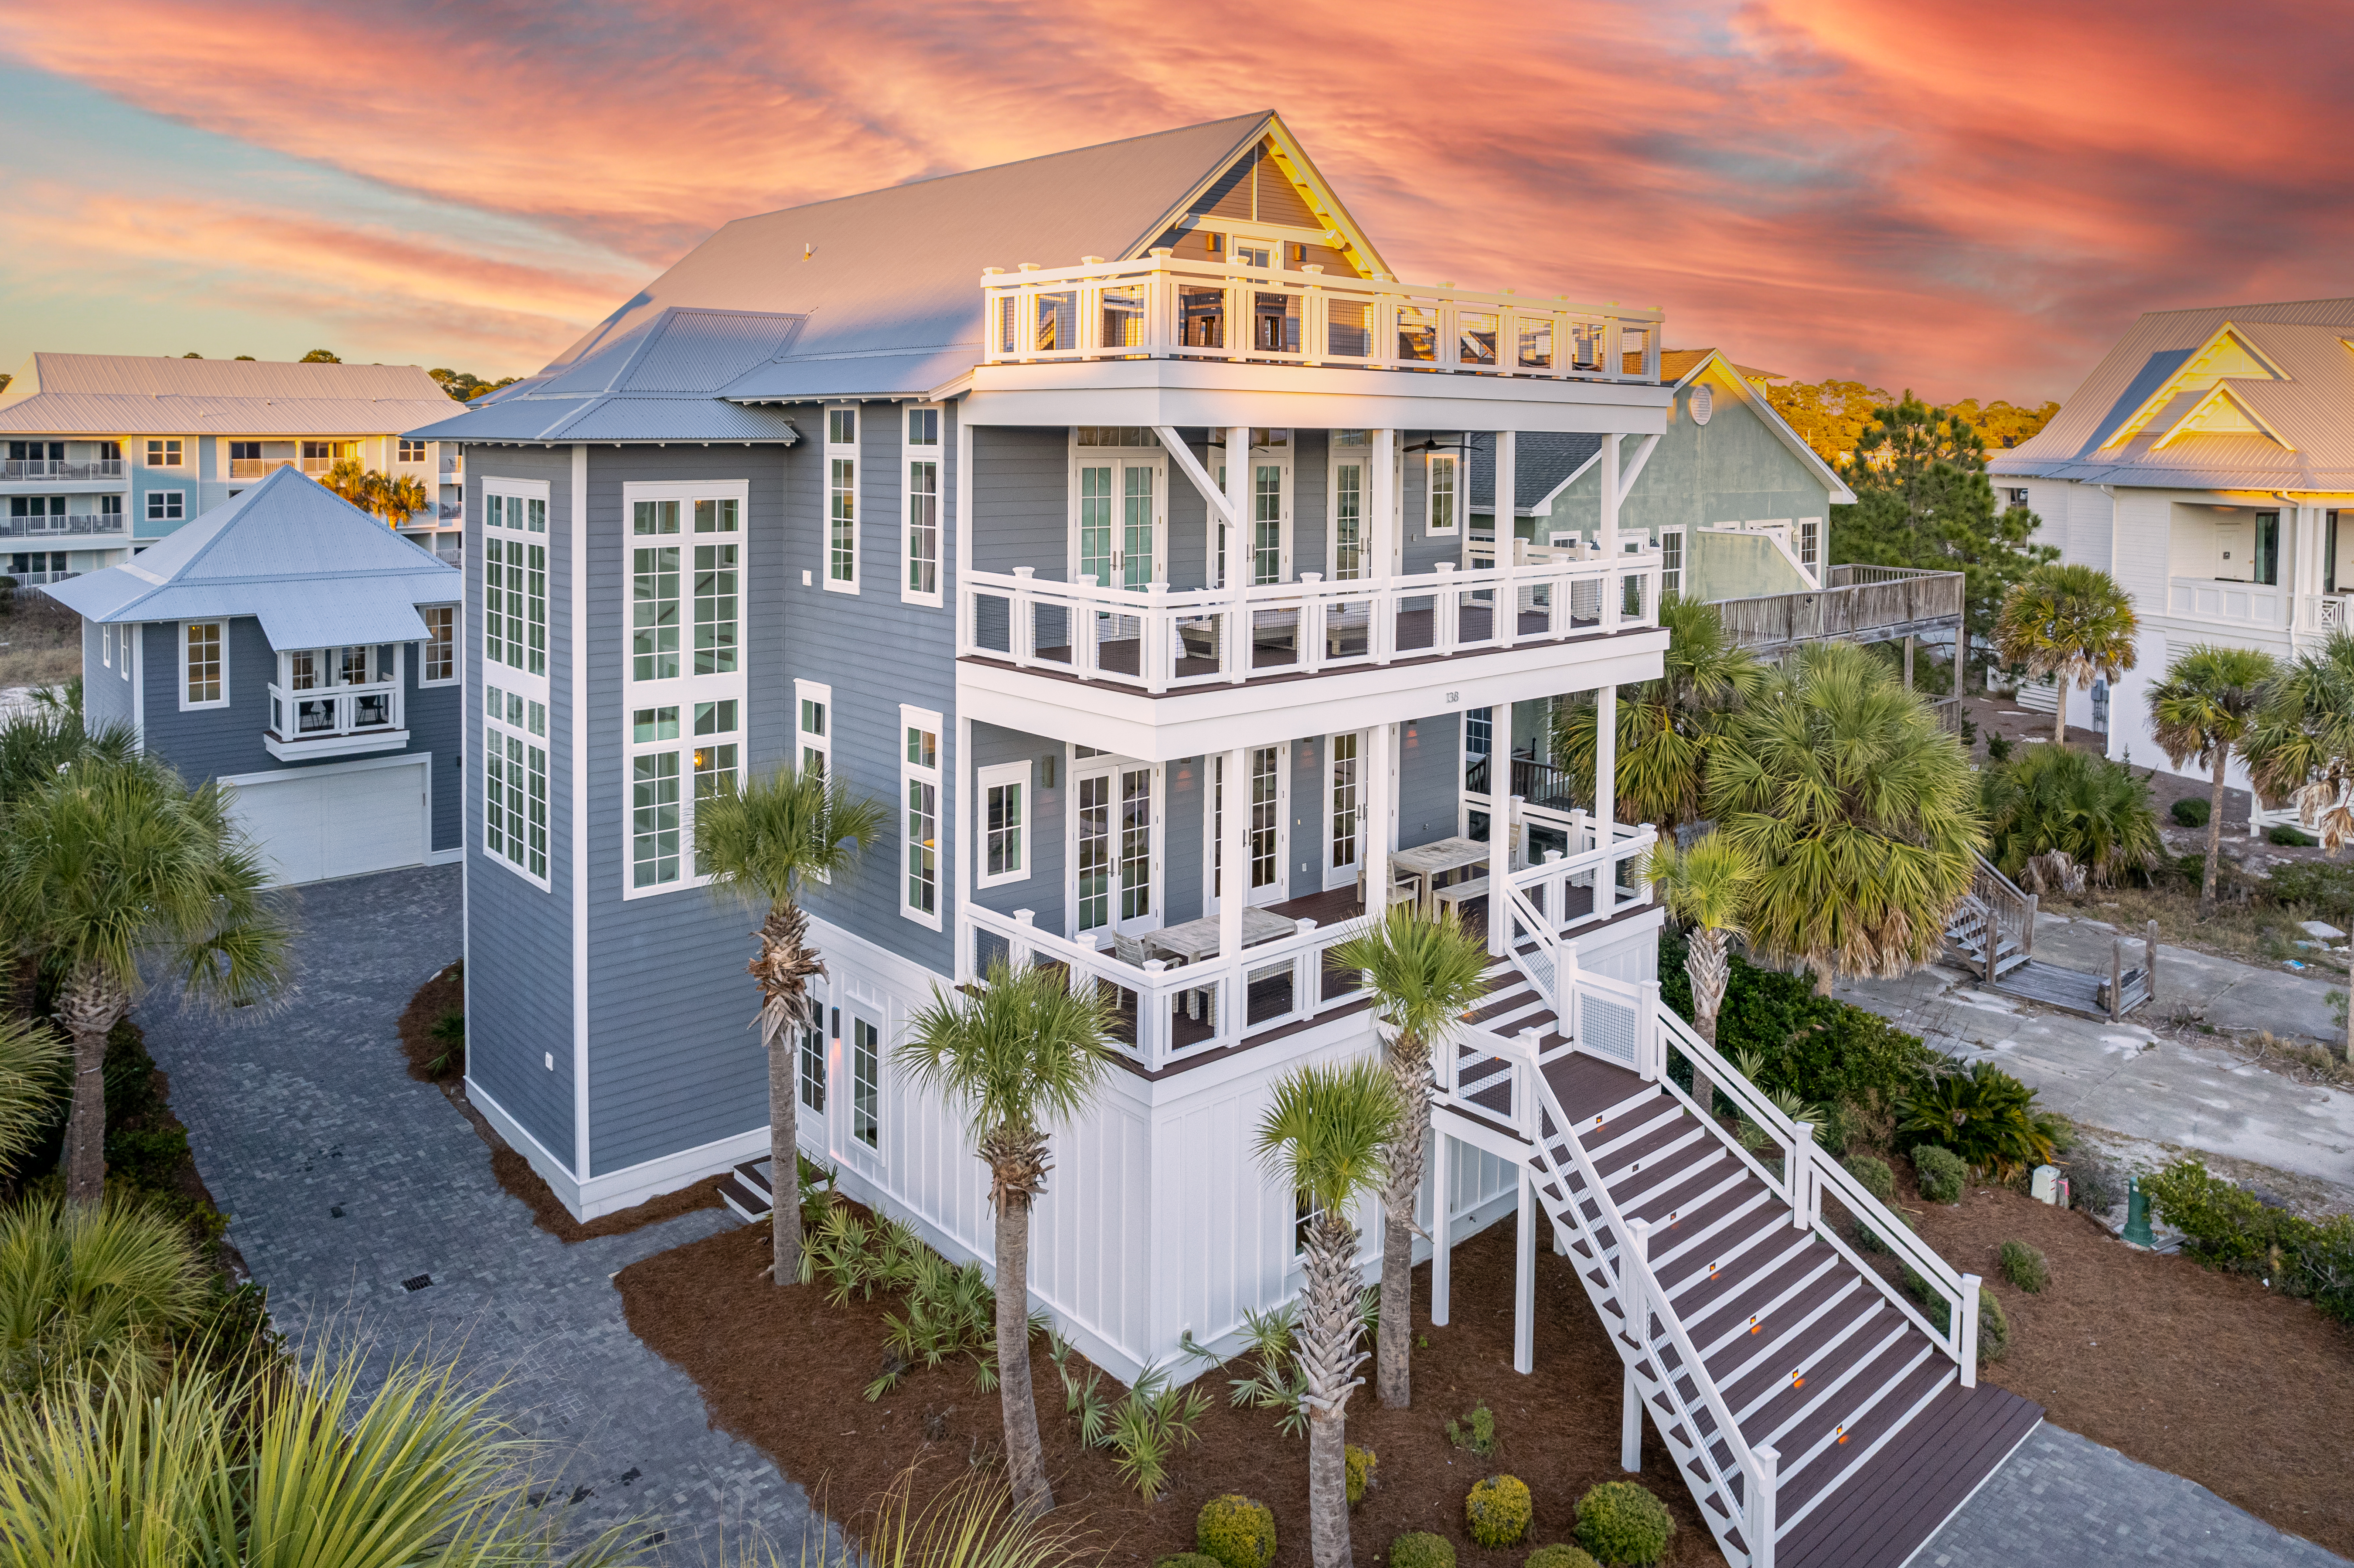 Beach Home With Carriage House, Private Pool And Impressive Rental History